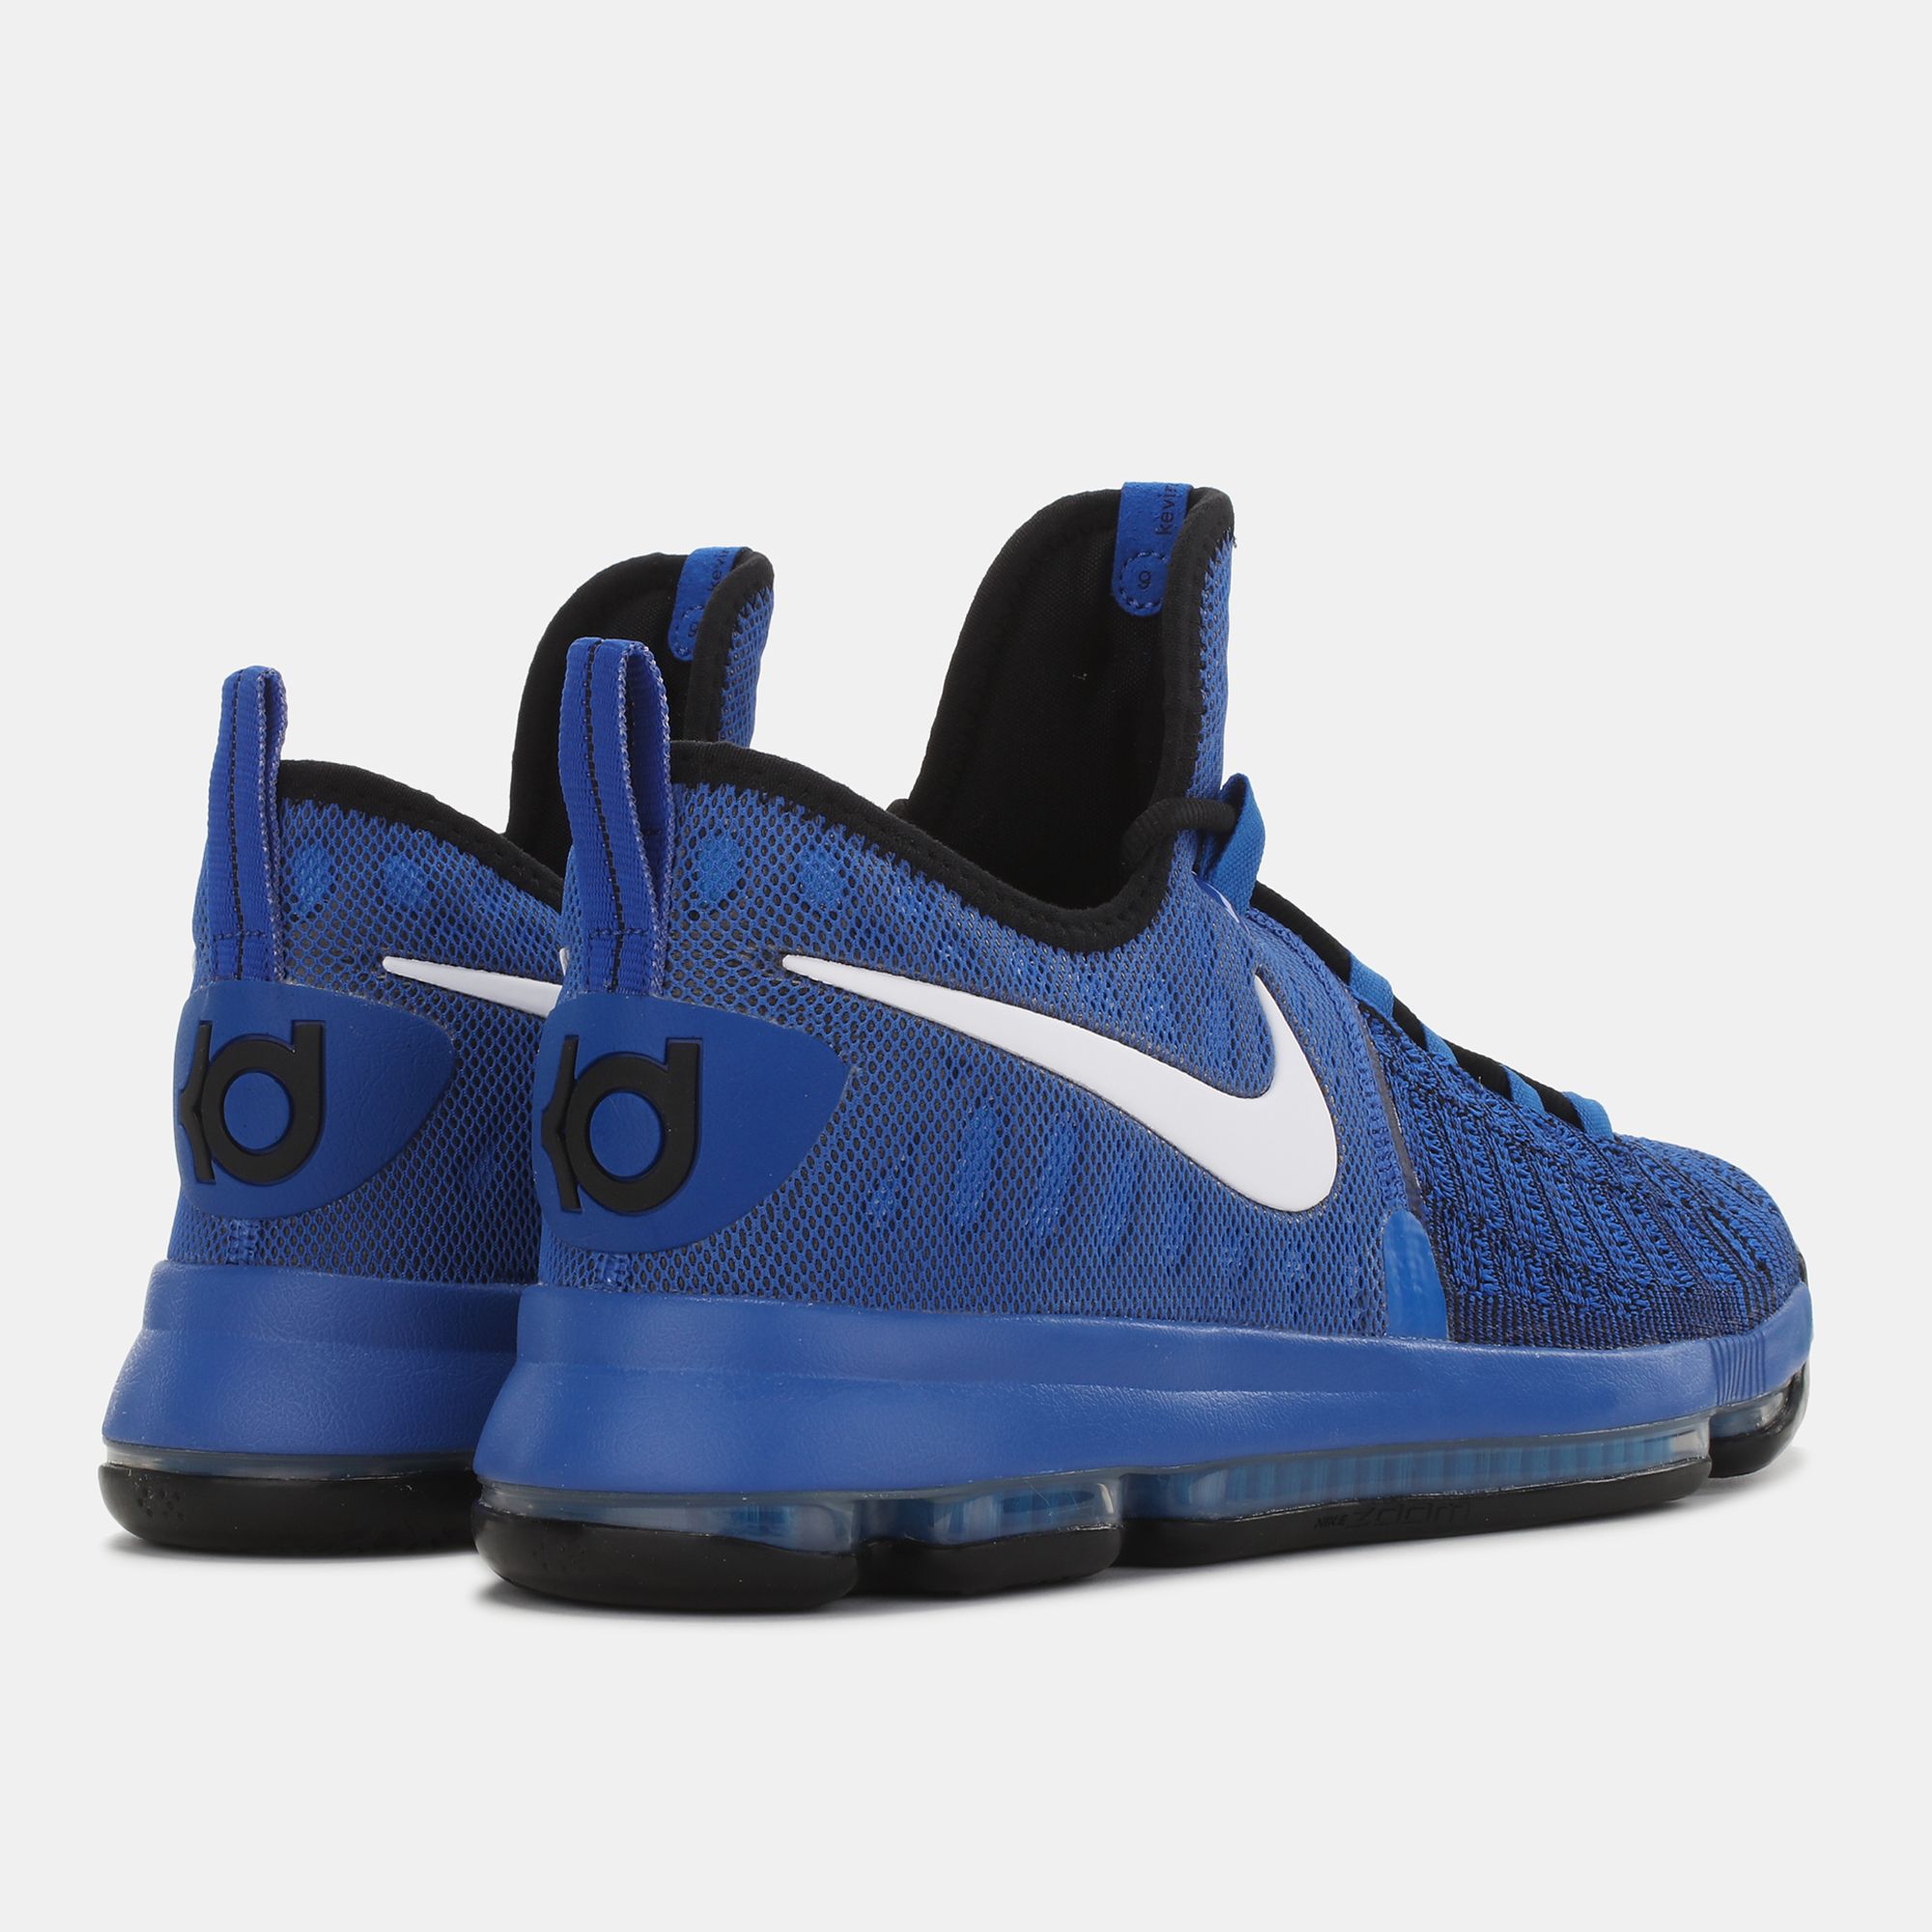 Shop Blue Nike Zoom Kevin Durant 9 Shoe for Mens by Nike | SSS